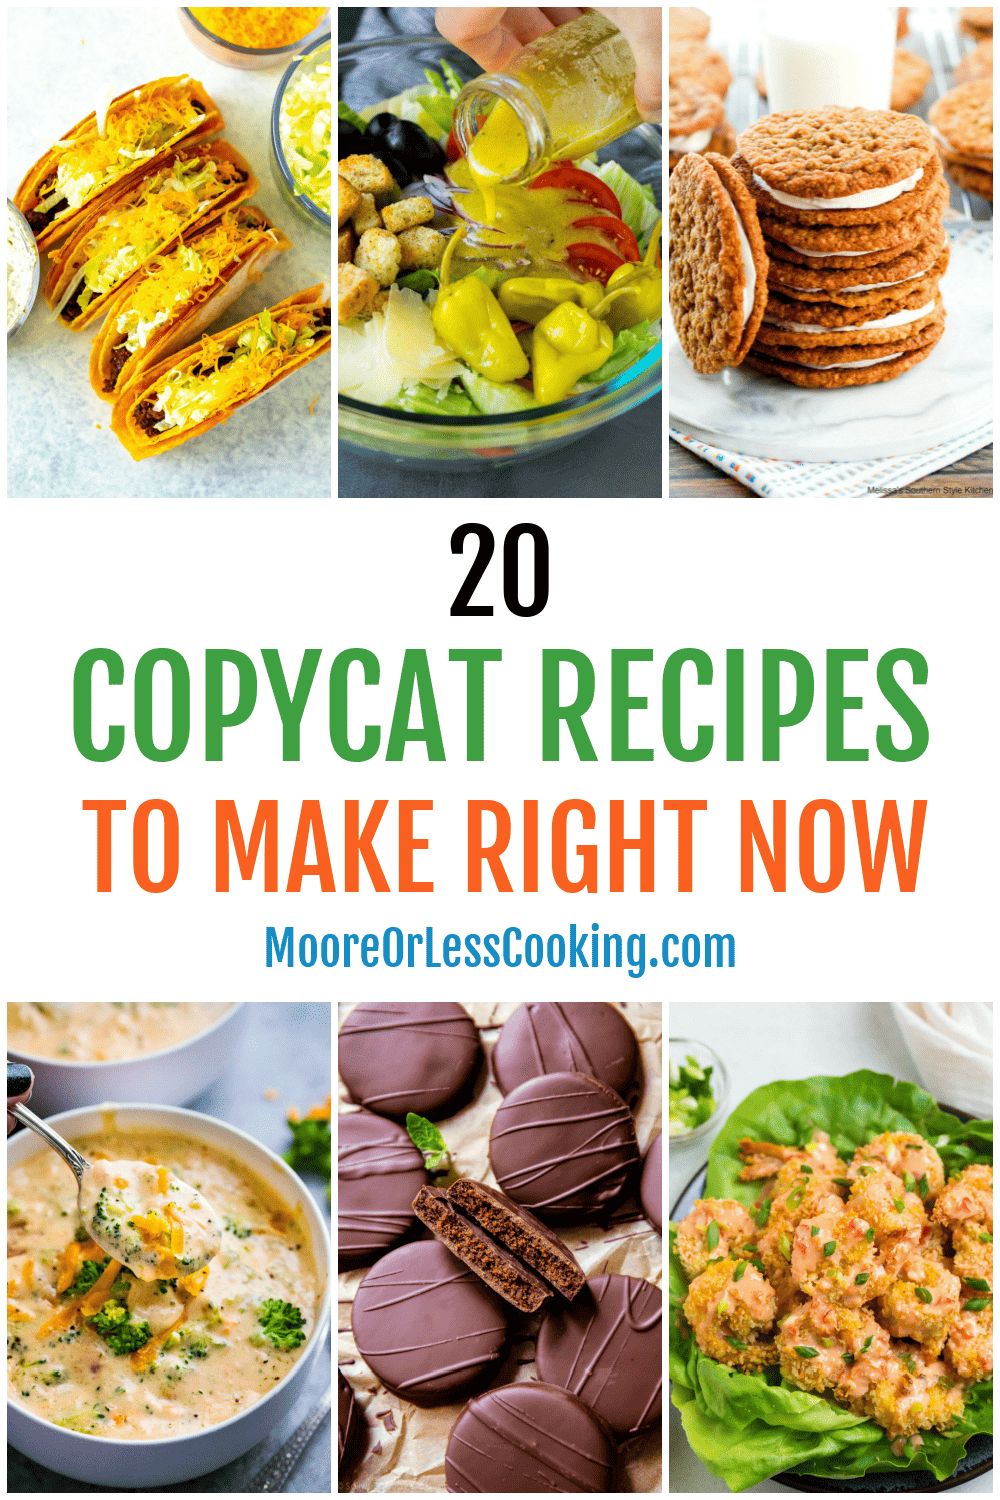 pin 20 copycat recipes to make right now mooreorlesscooking.com